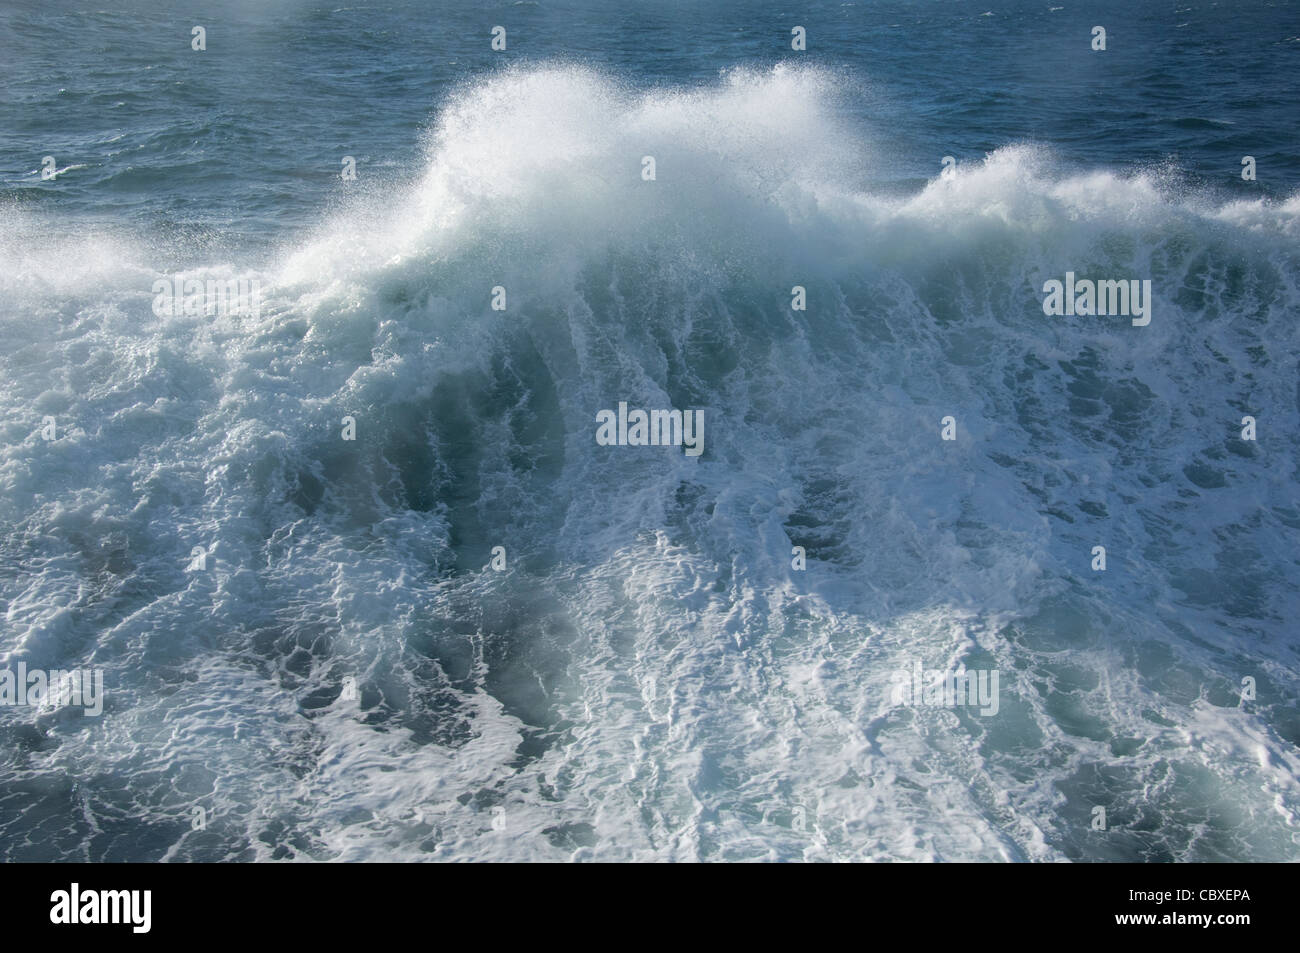 Scotland, North Atlantic ocean off the island of Mull. High seas and winds. Stock Photo